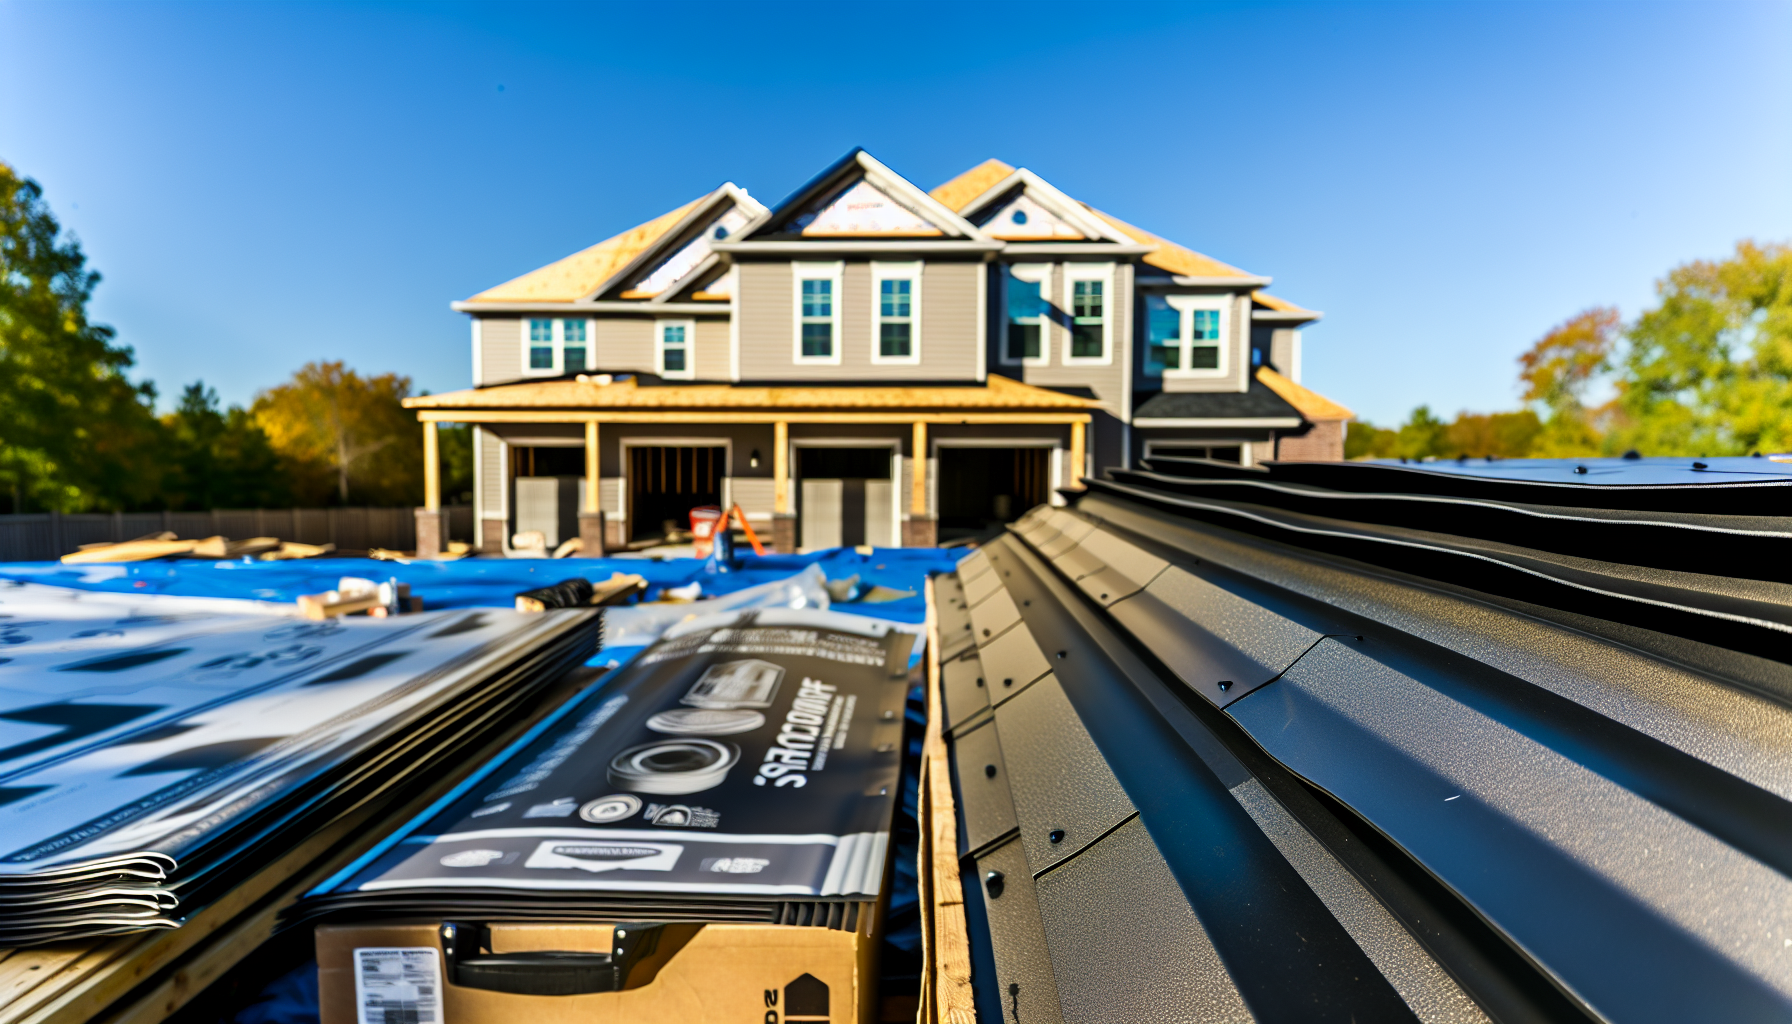 Roofing materials and construction designed to withstand severe weather